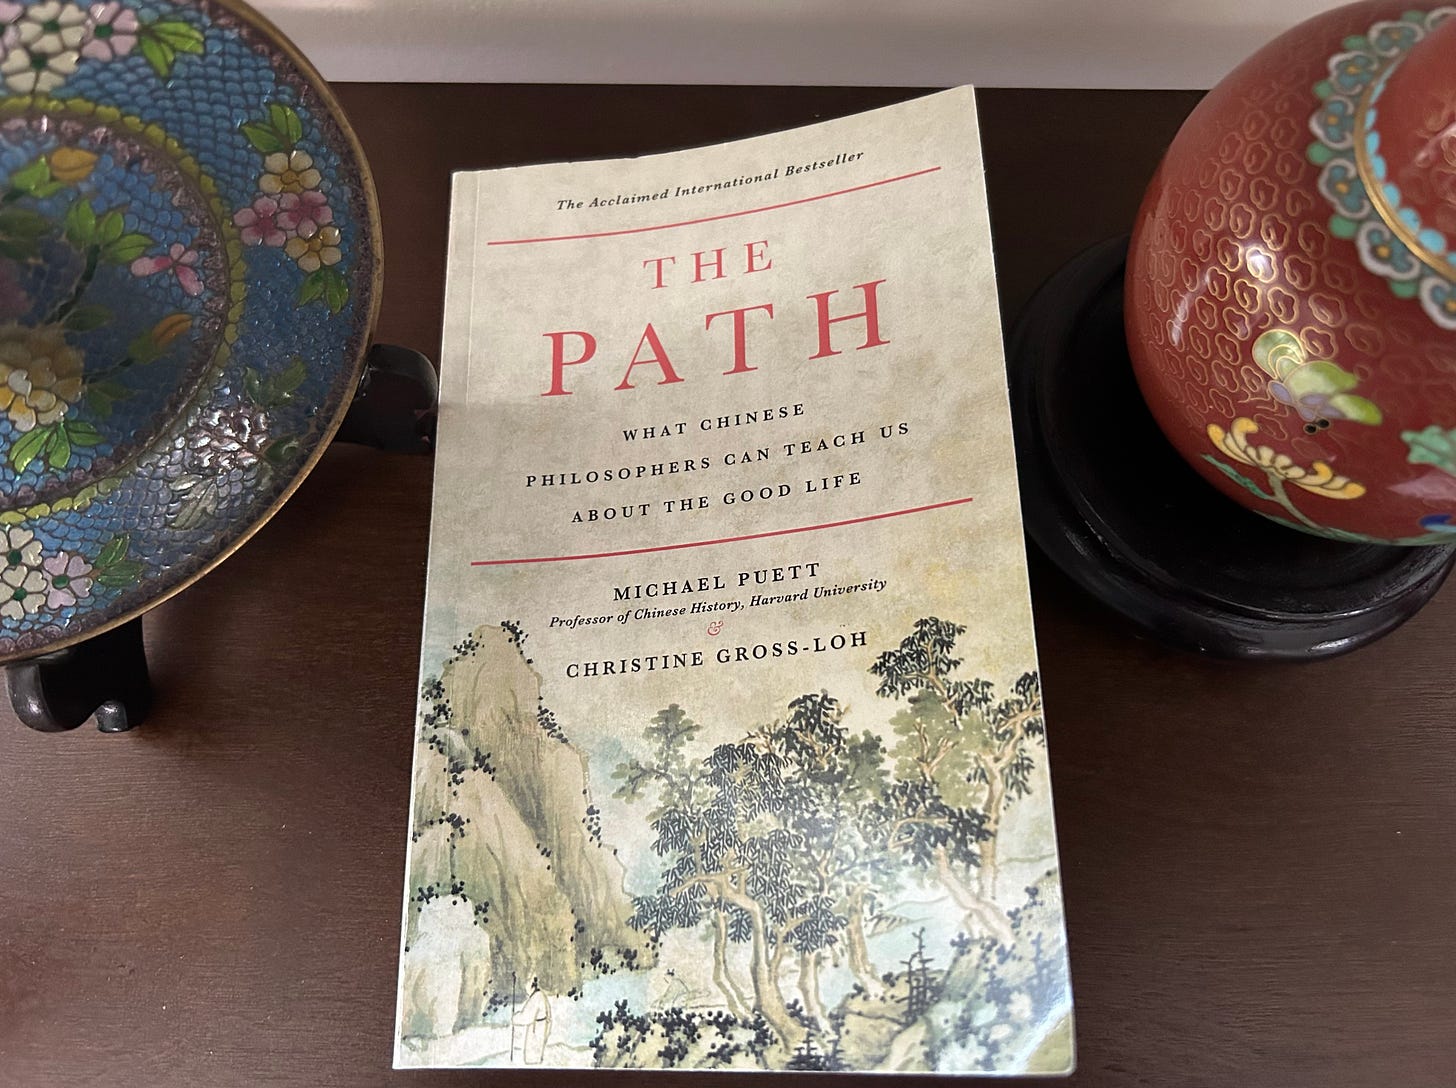 A copy of The Path sitting on a shelf in between a blue decorative plate and red urn.